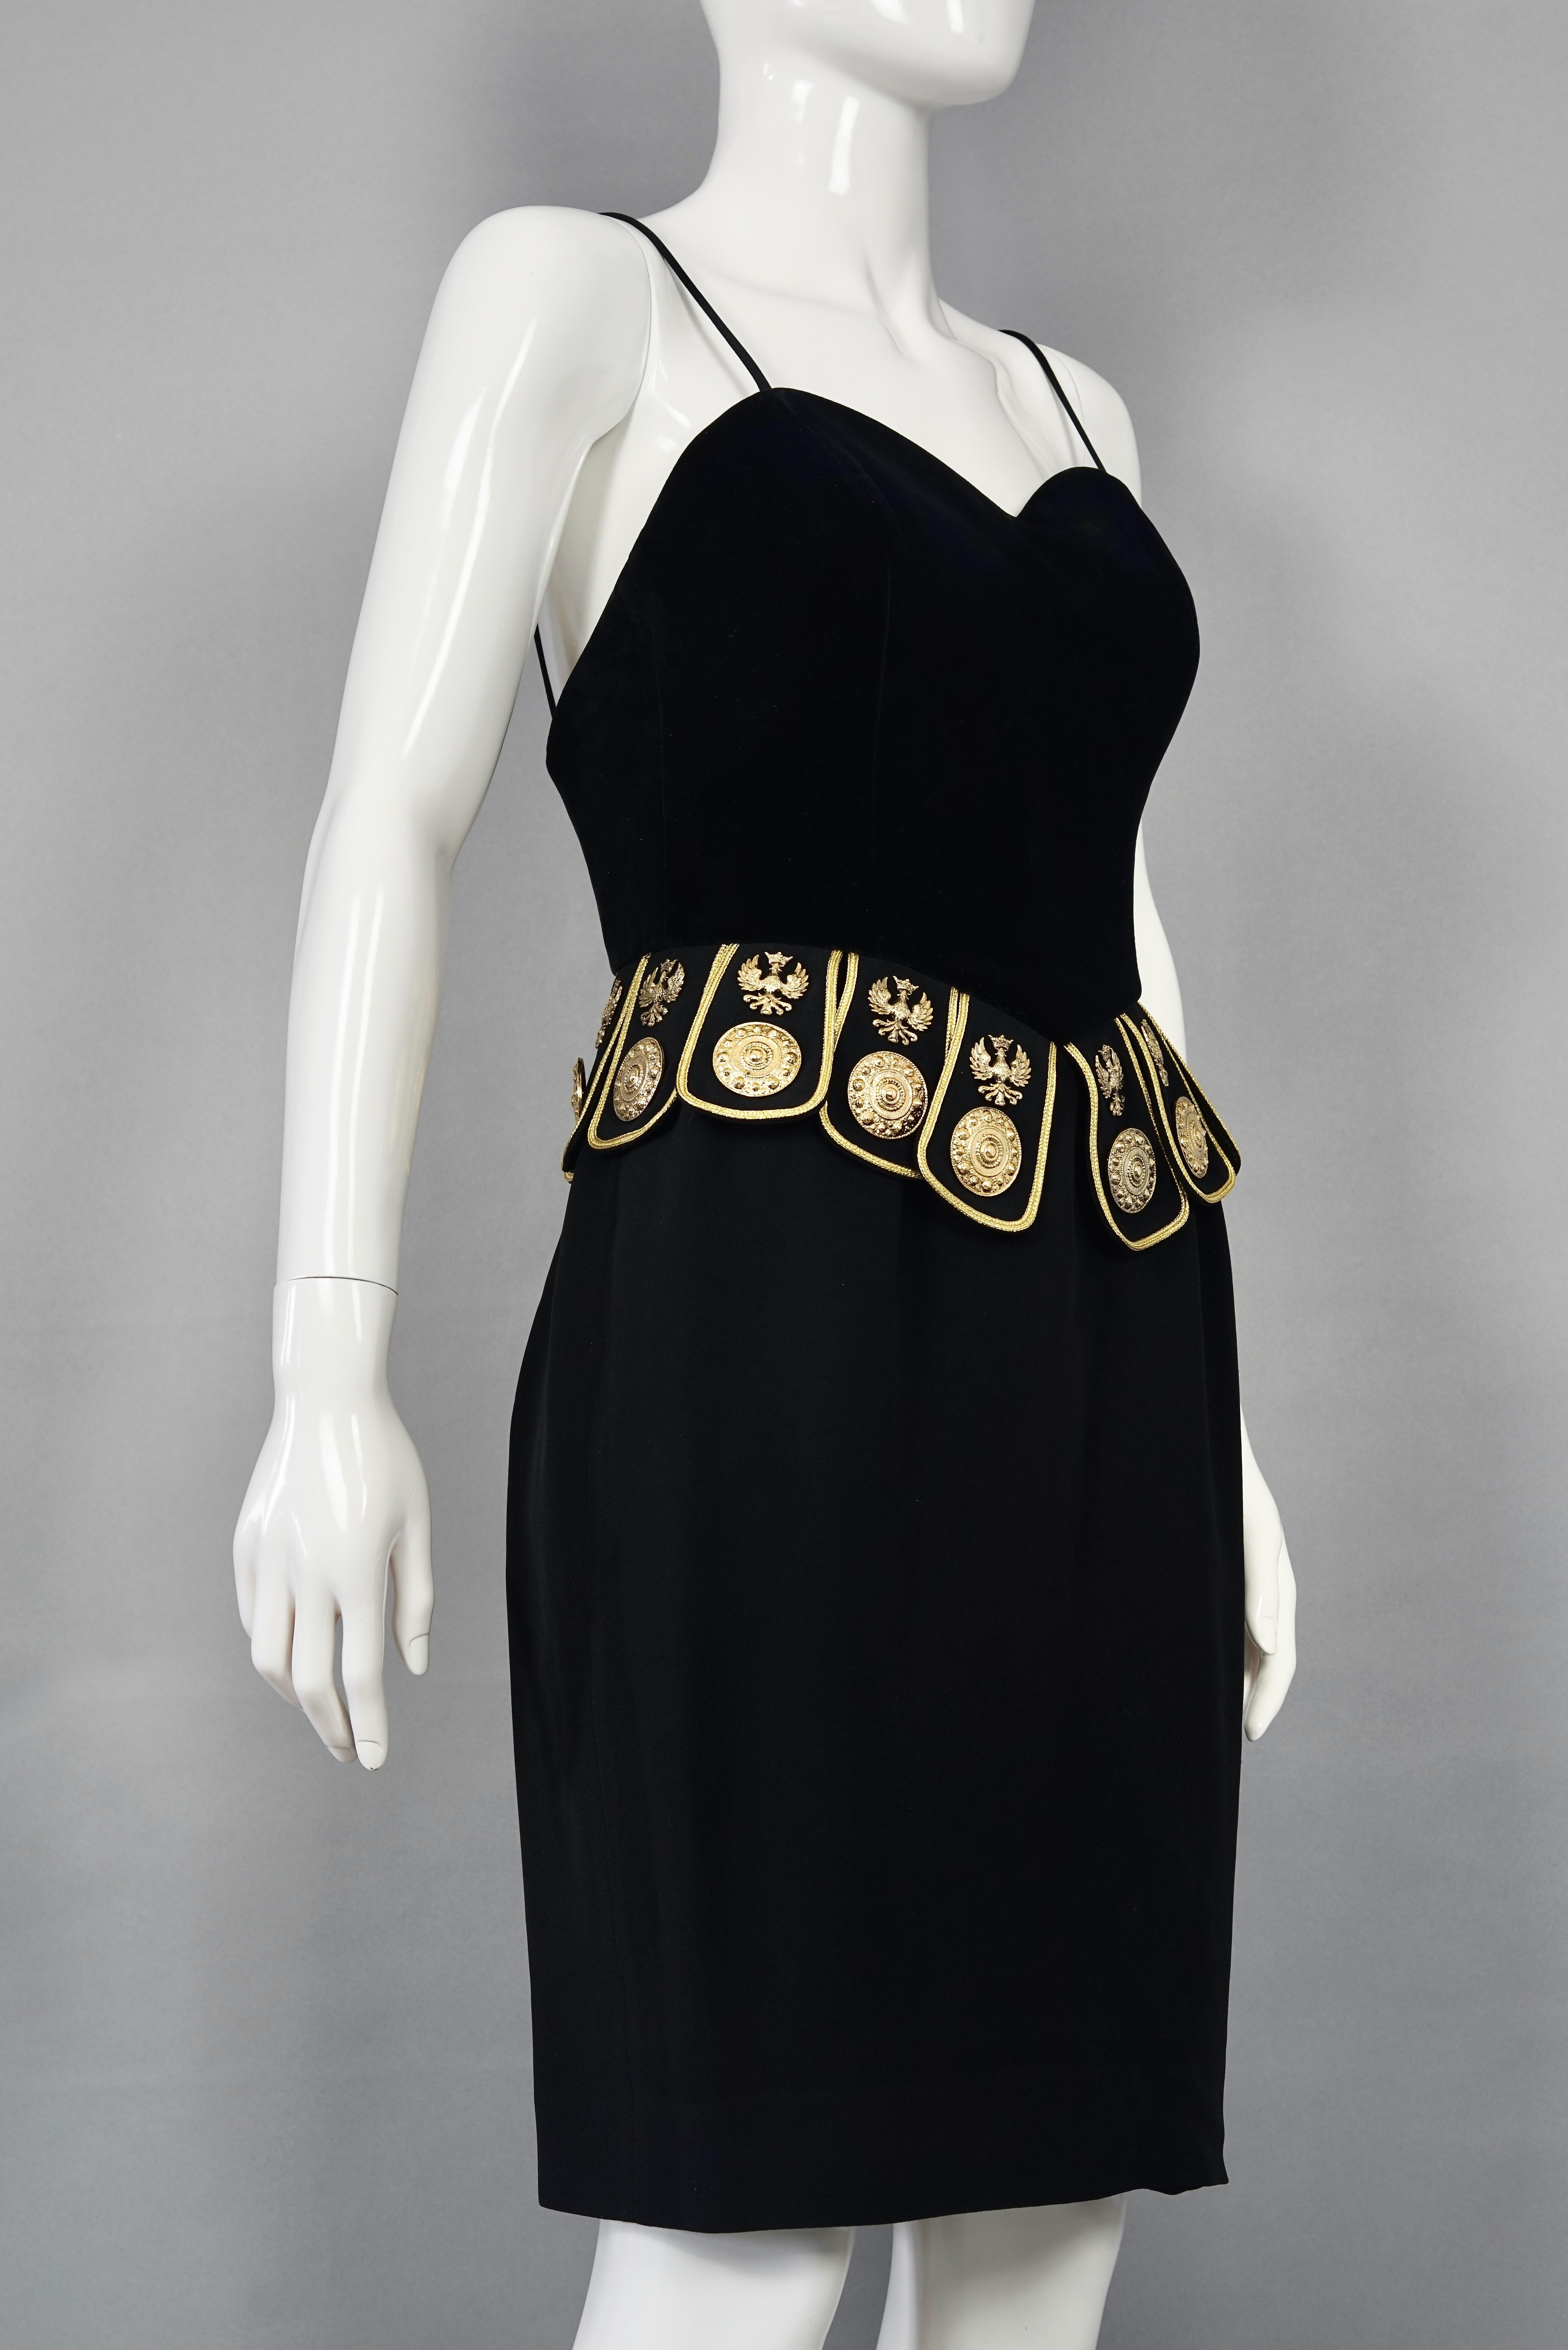 Vintage MOSCHINO COUTURE Roman Centurion Gladiator Velvet Dress
From 1989 Collection.

Measurements taken laid flat, please double bust, waist and hips:
Bust: 16.92 inches (43 cm)
Waist: 14.17 inches (36 cm)
Hips: 19.29 inches (49 cm)
Length: 31.50